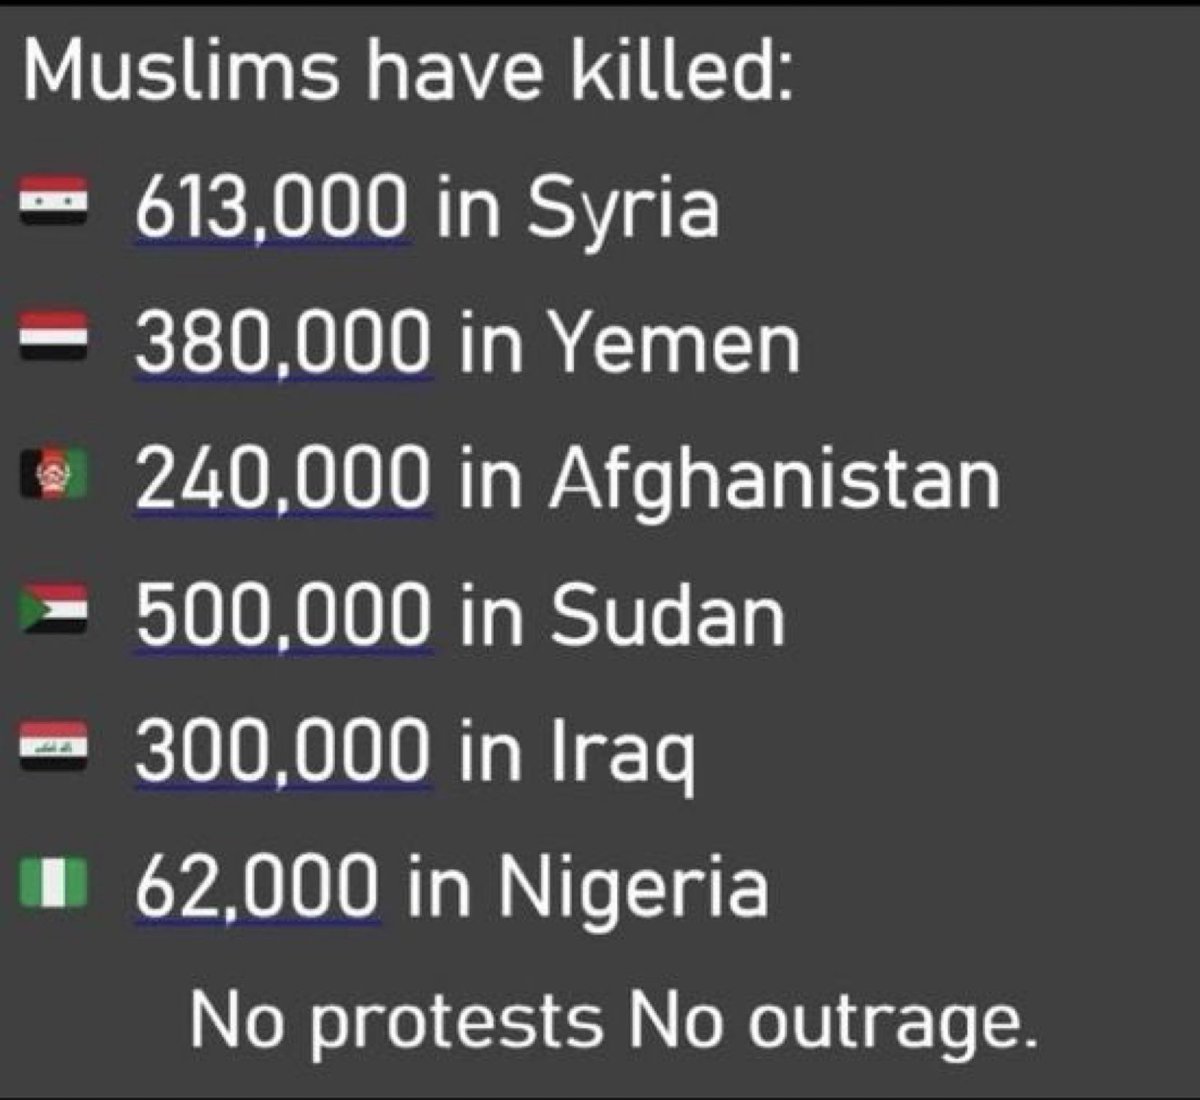 Everyone is quick to condemn Israel but let’s take a look at Muslim stats.